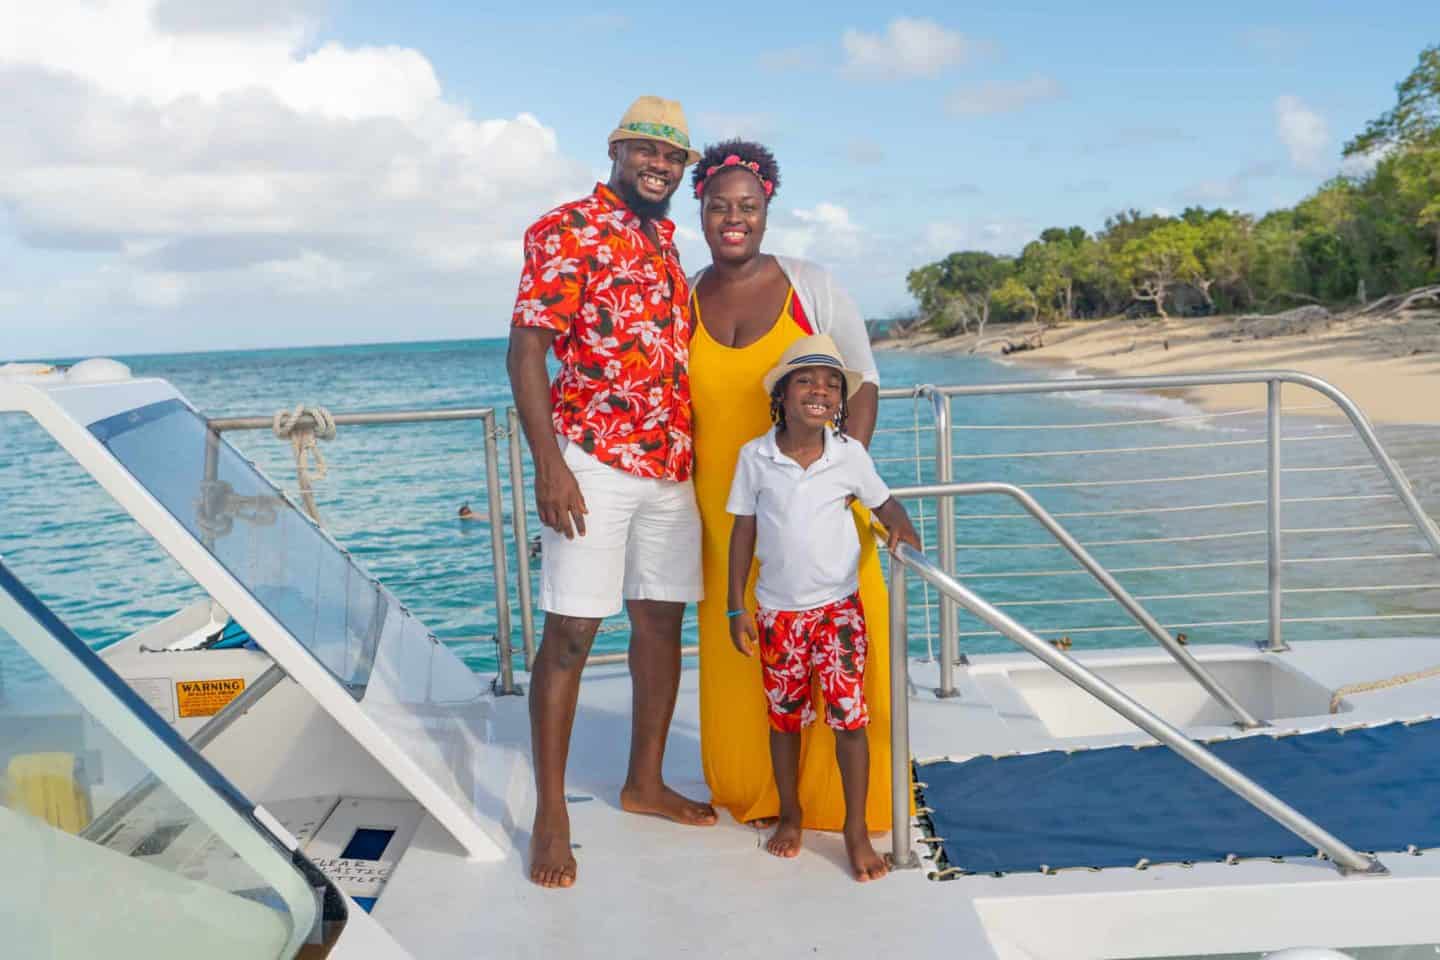 Black Family Travel Things To Do In St Croix Black Family Travel Black Travelers Black Kids Travel Black Family Traveling The World Black Worldschoolers African American Family 117